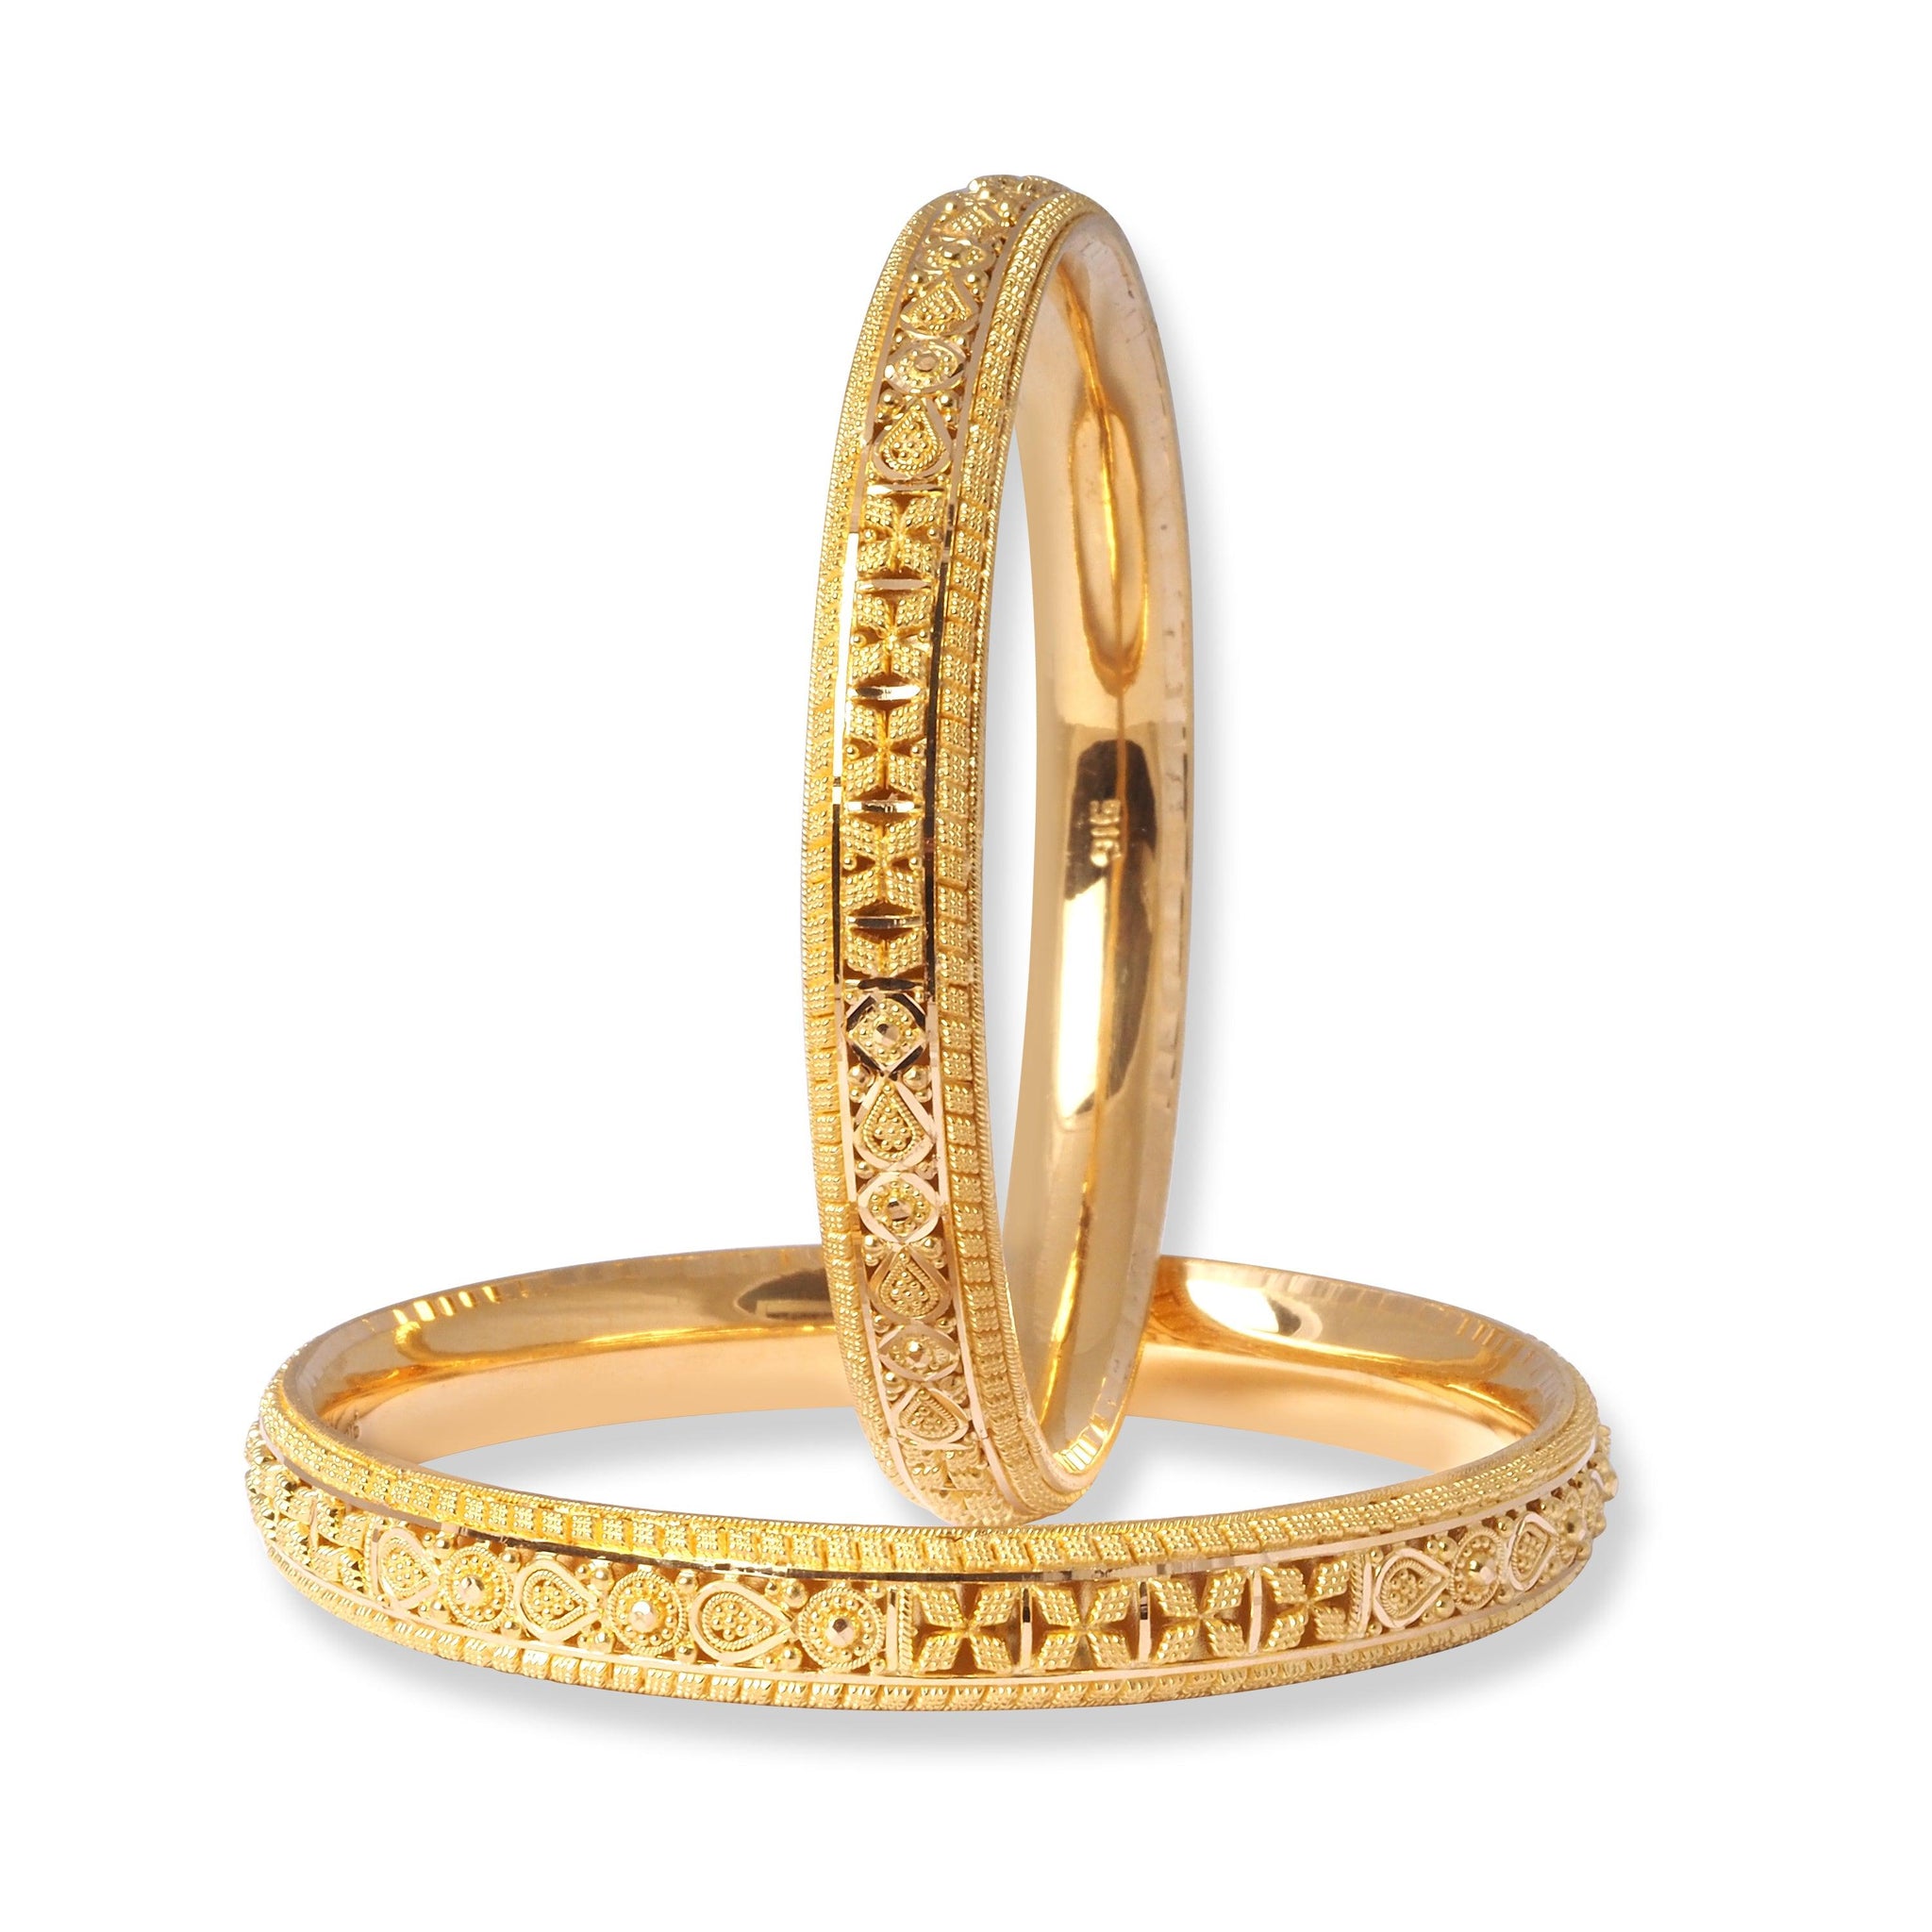 22ct Gold Pair of Bangles with Filigree Work B-8555